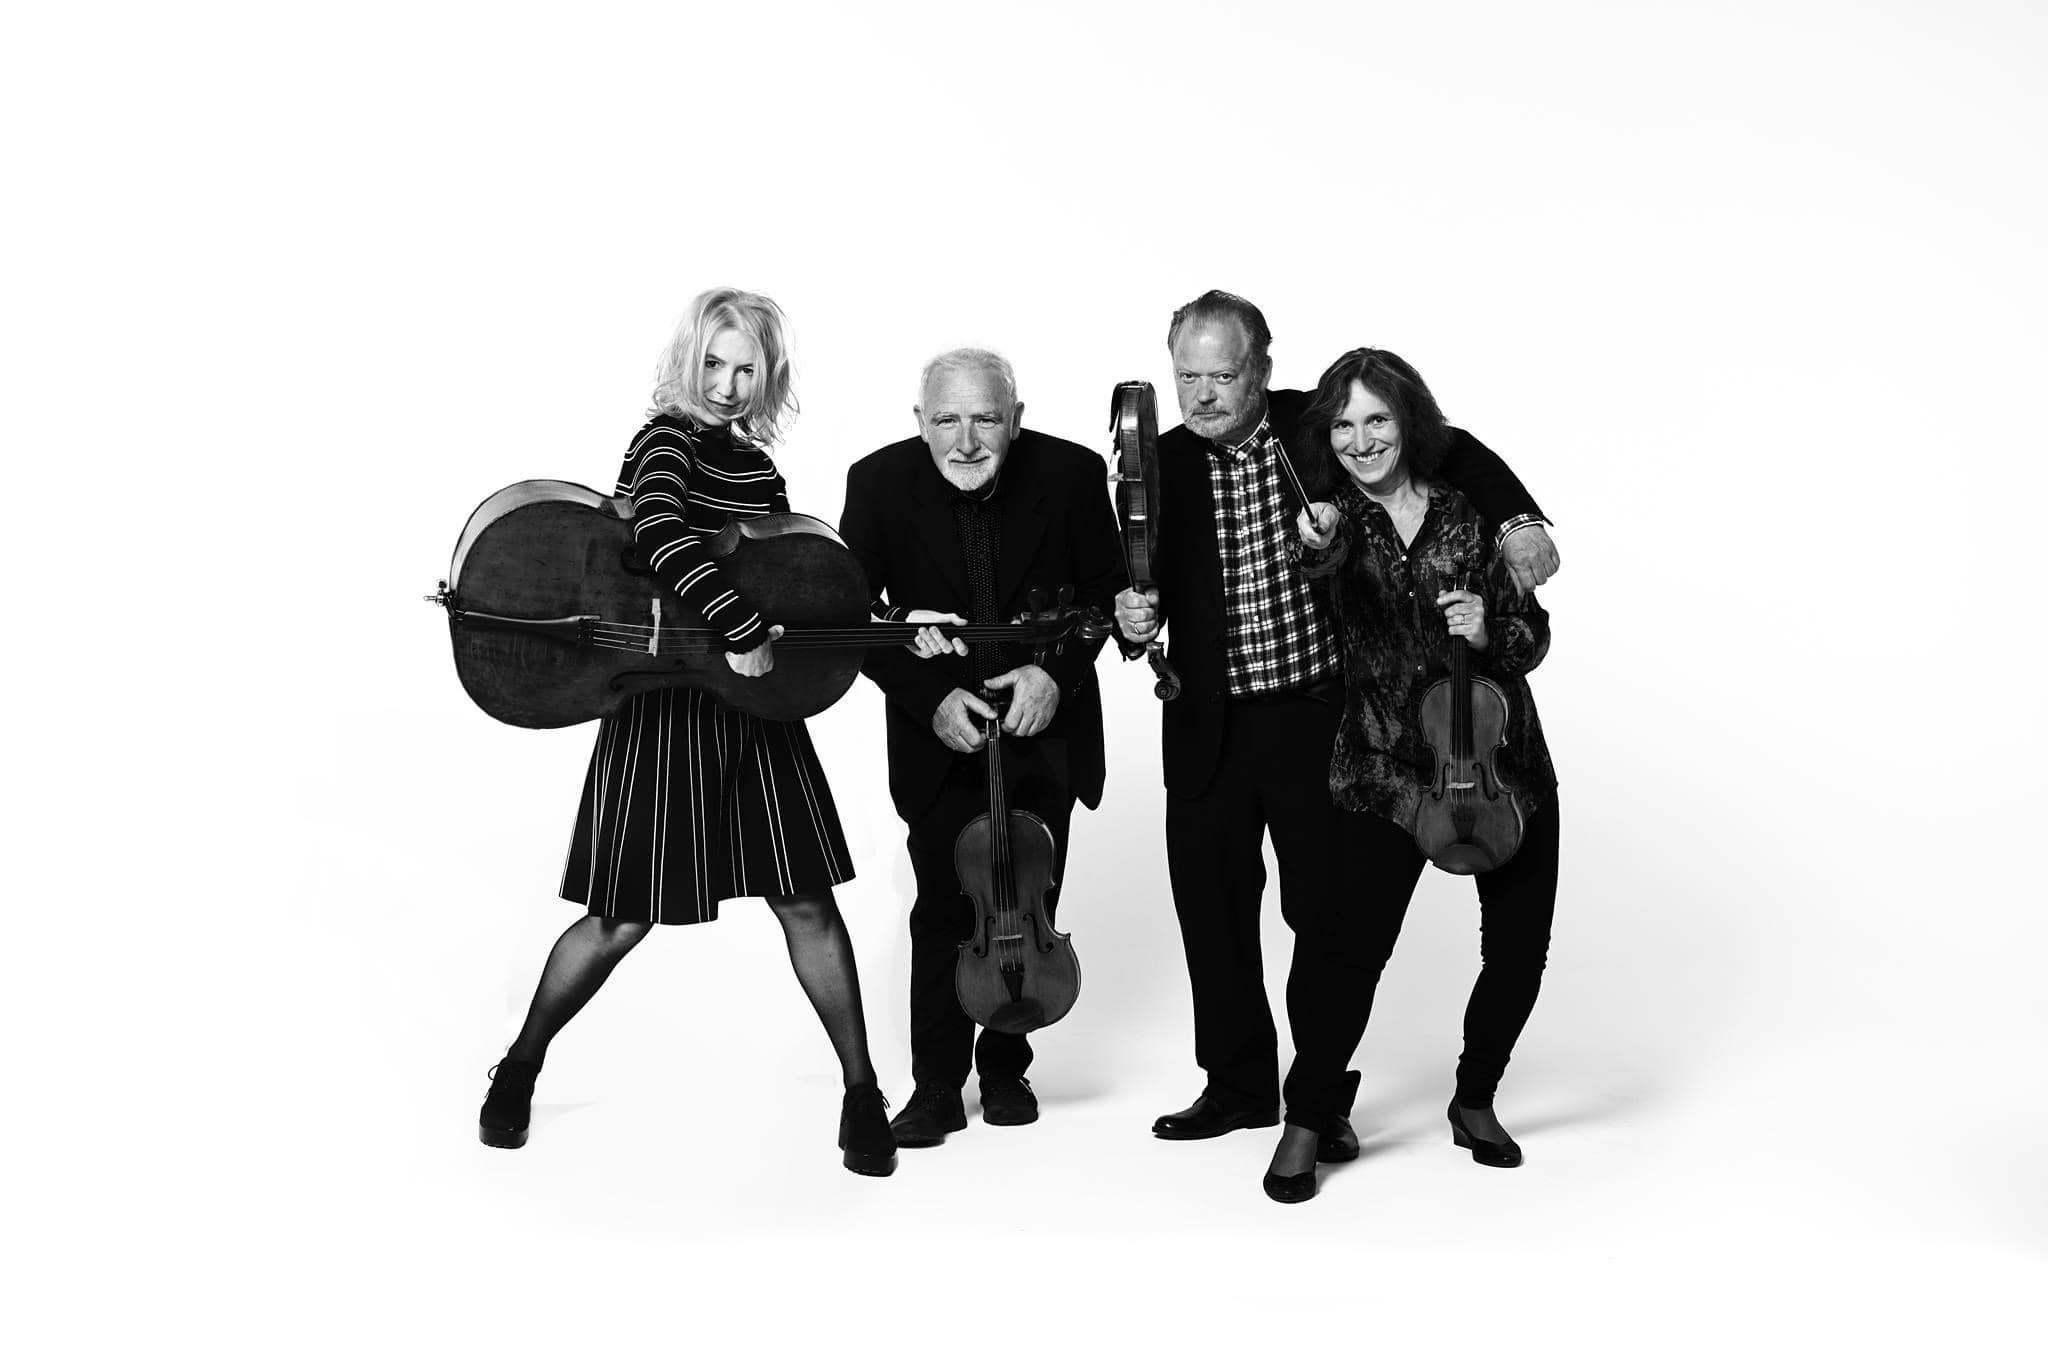 Four string musicians wearing black against a plain white background and looking into the camera